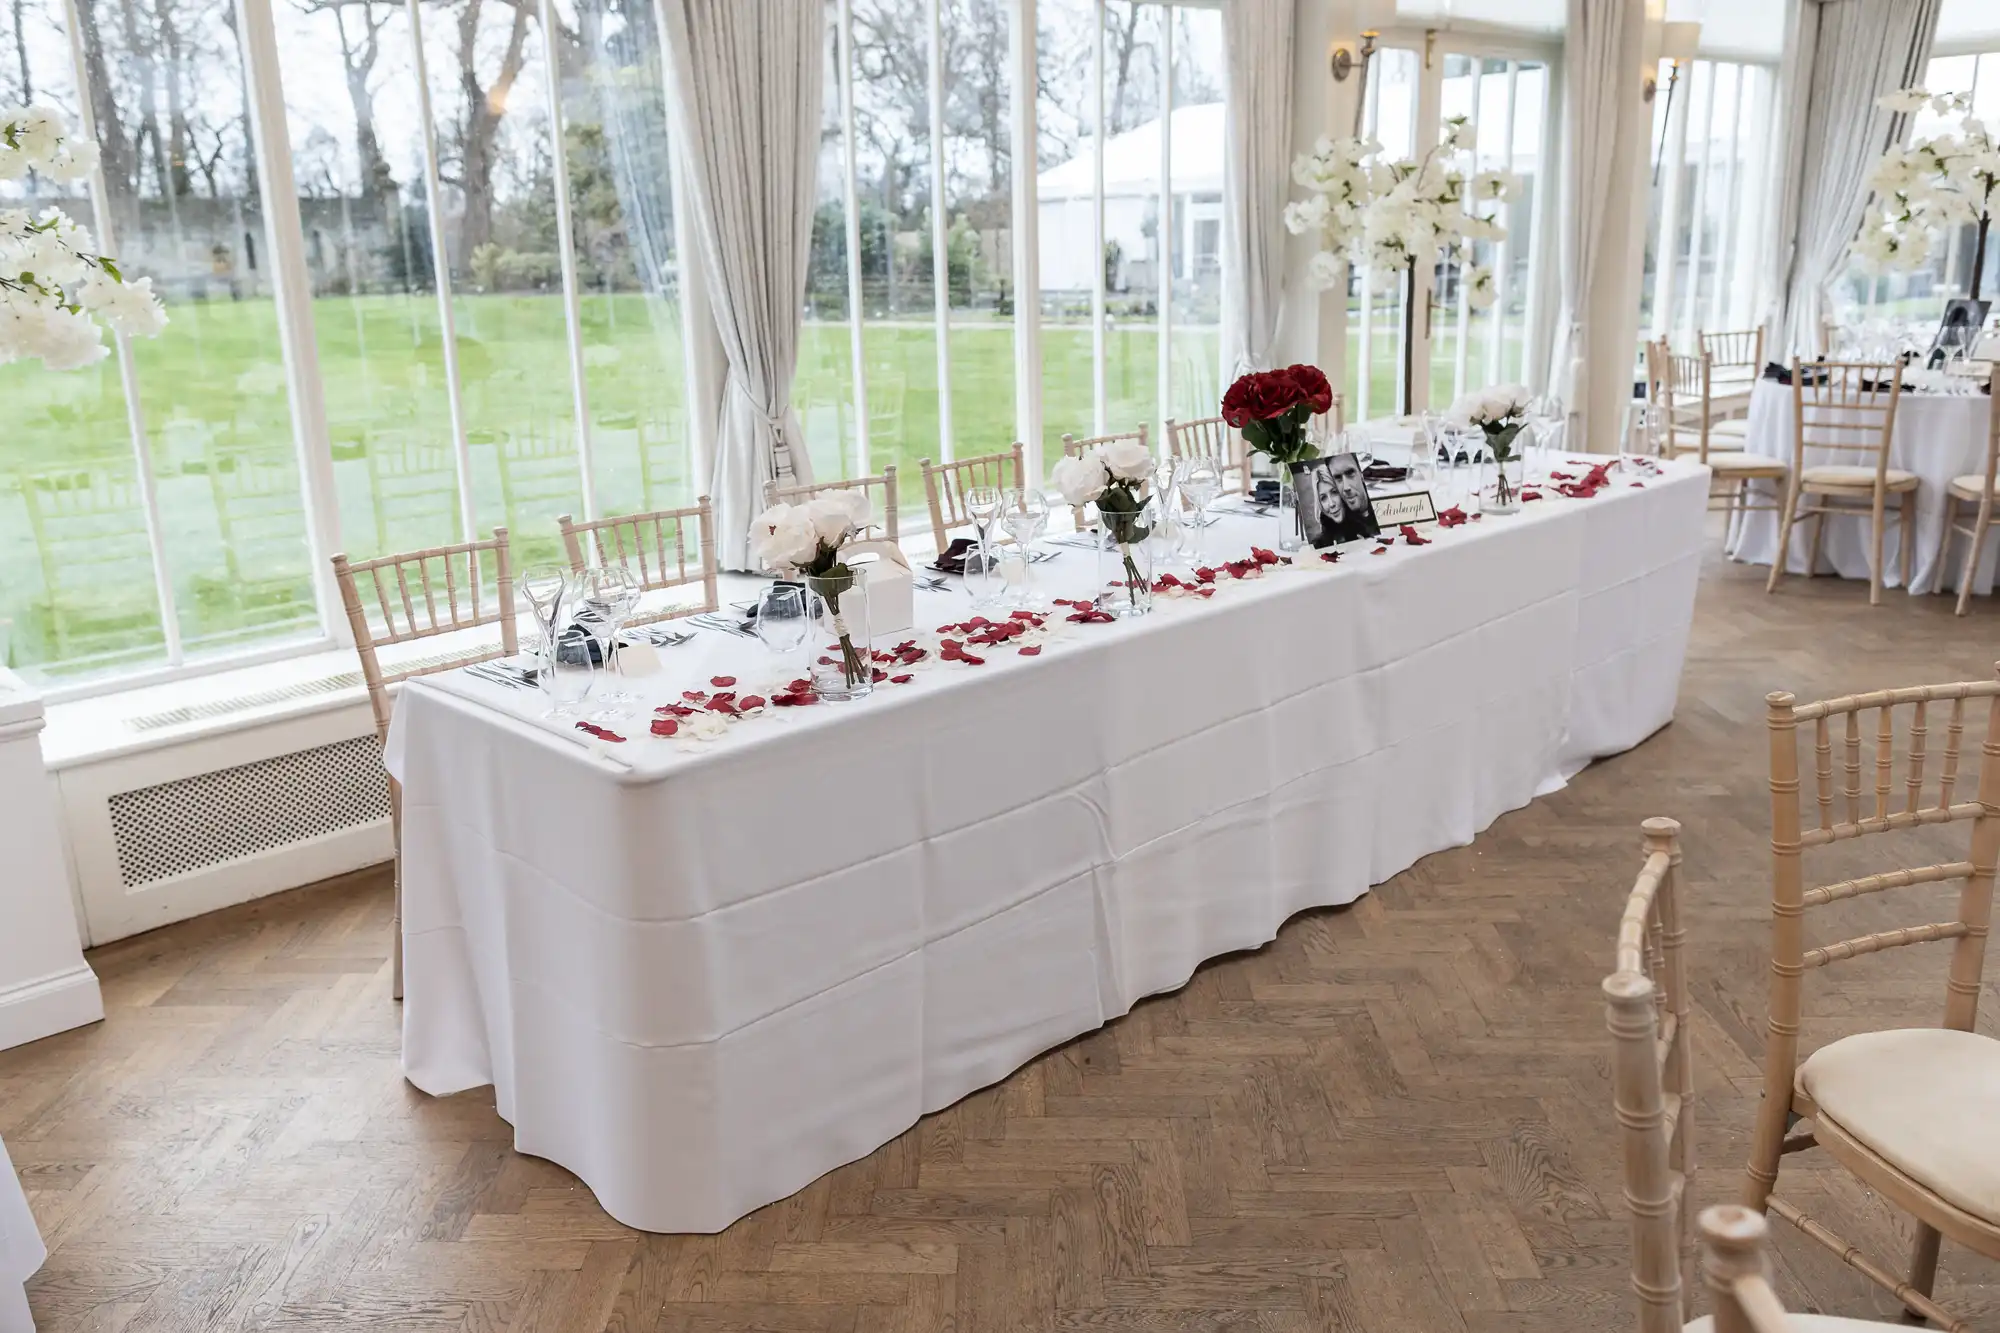 A long table with a white tablecloth, decorated with red and white flowers, and set with dining ware in a room with large windows and light wooden chairs.